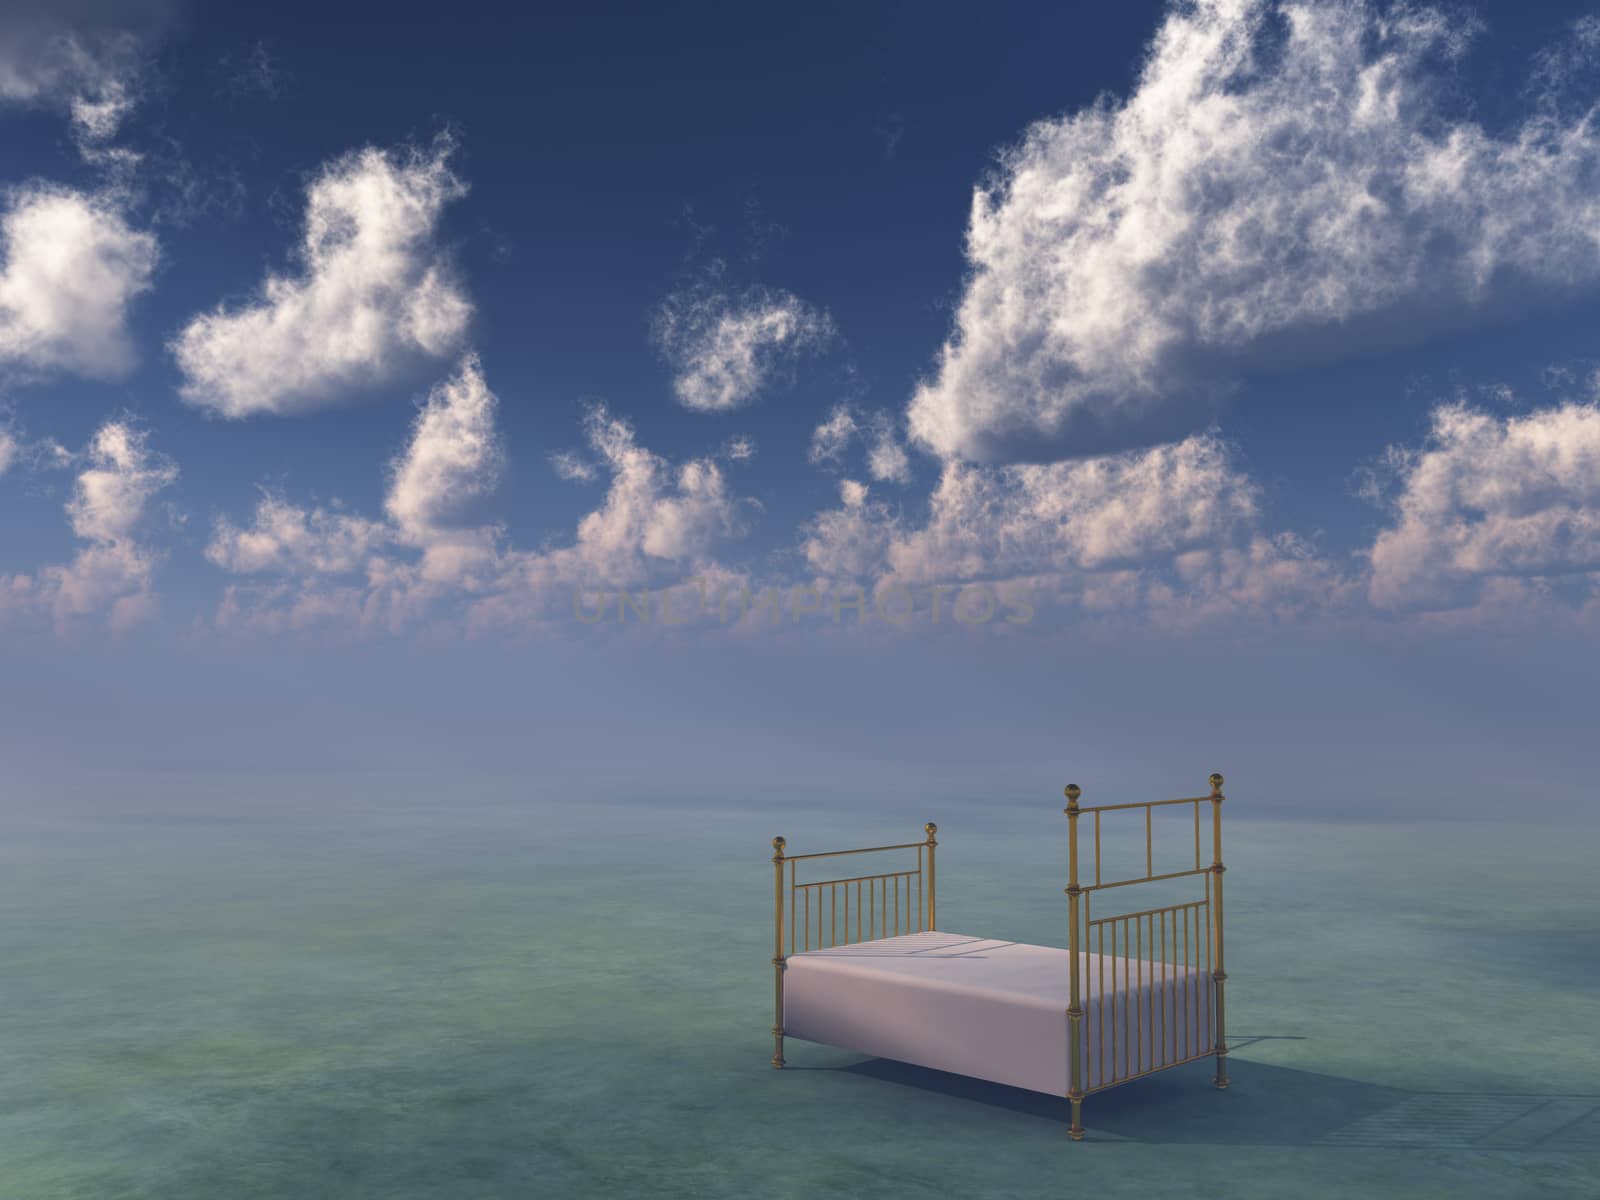 Bed in sky by applesstock